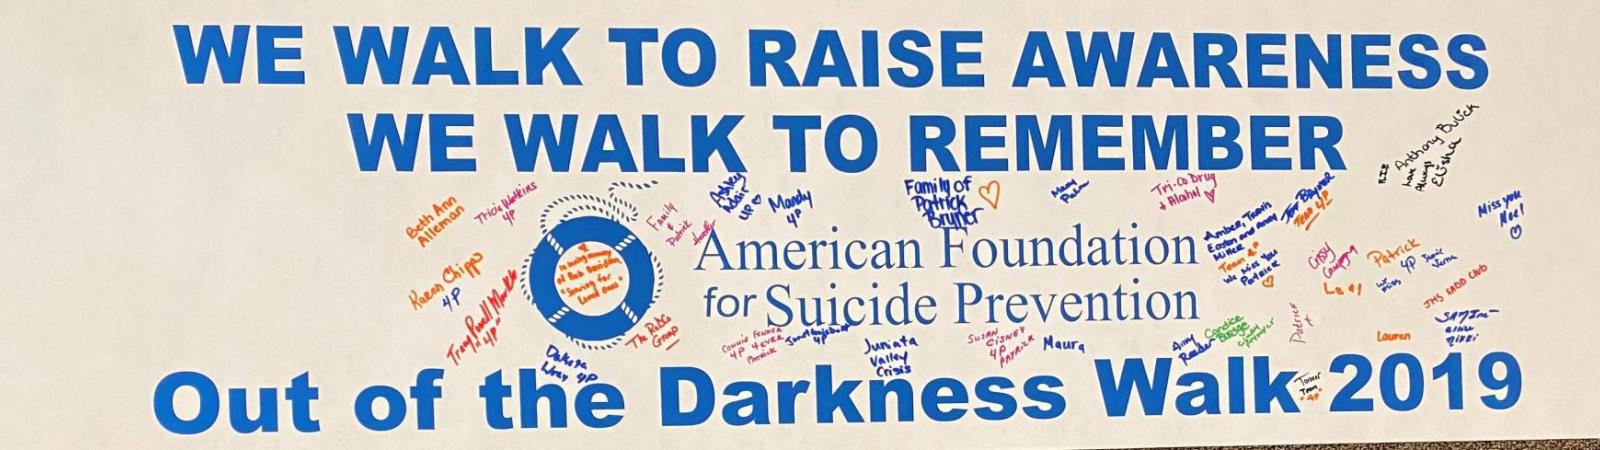 Out of the Darkness Walk Banner 2019